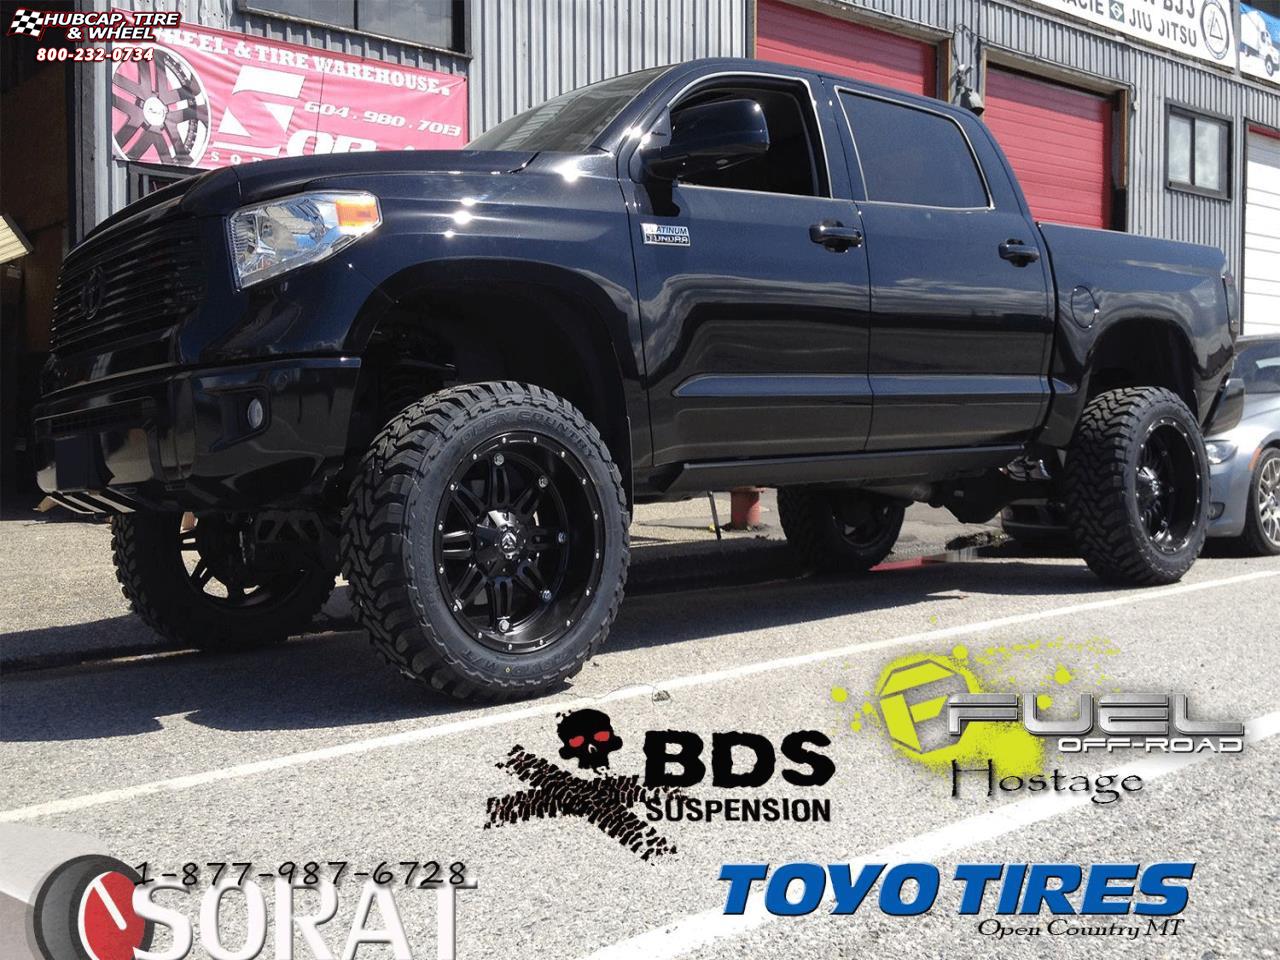 vehicle gallery/toyota tundra fuel hostage d531 0X0  Matte Black wheels and rims